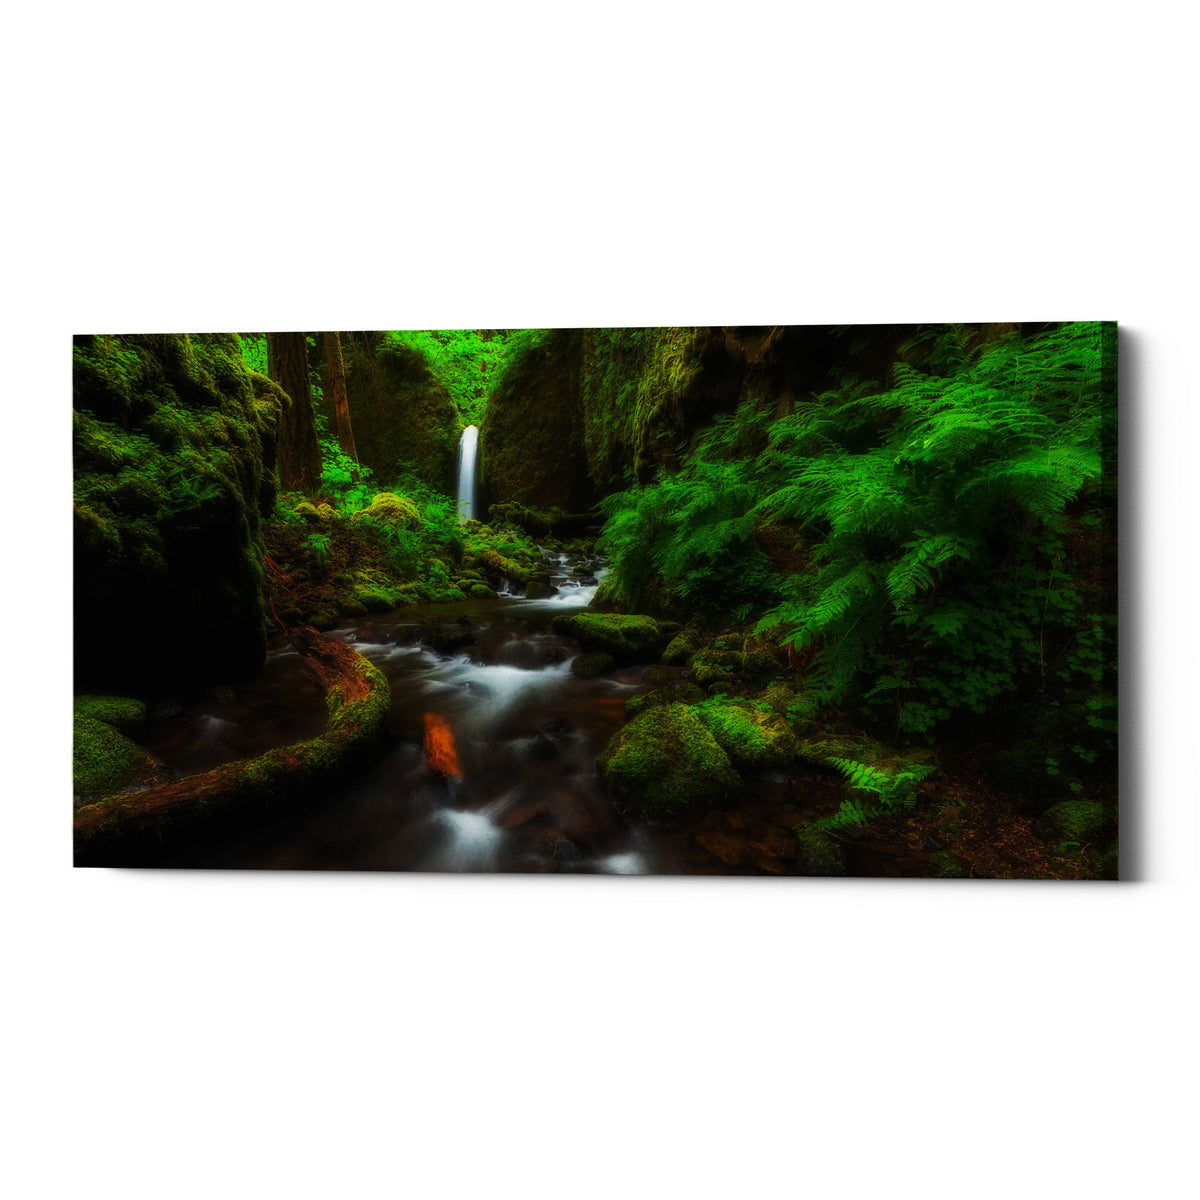 Epic Graffiti &quot;Early Morning At The Grotto&quot; by Darren White, Giclee Canvas Wall Art